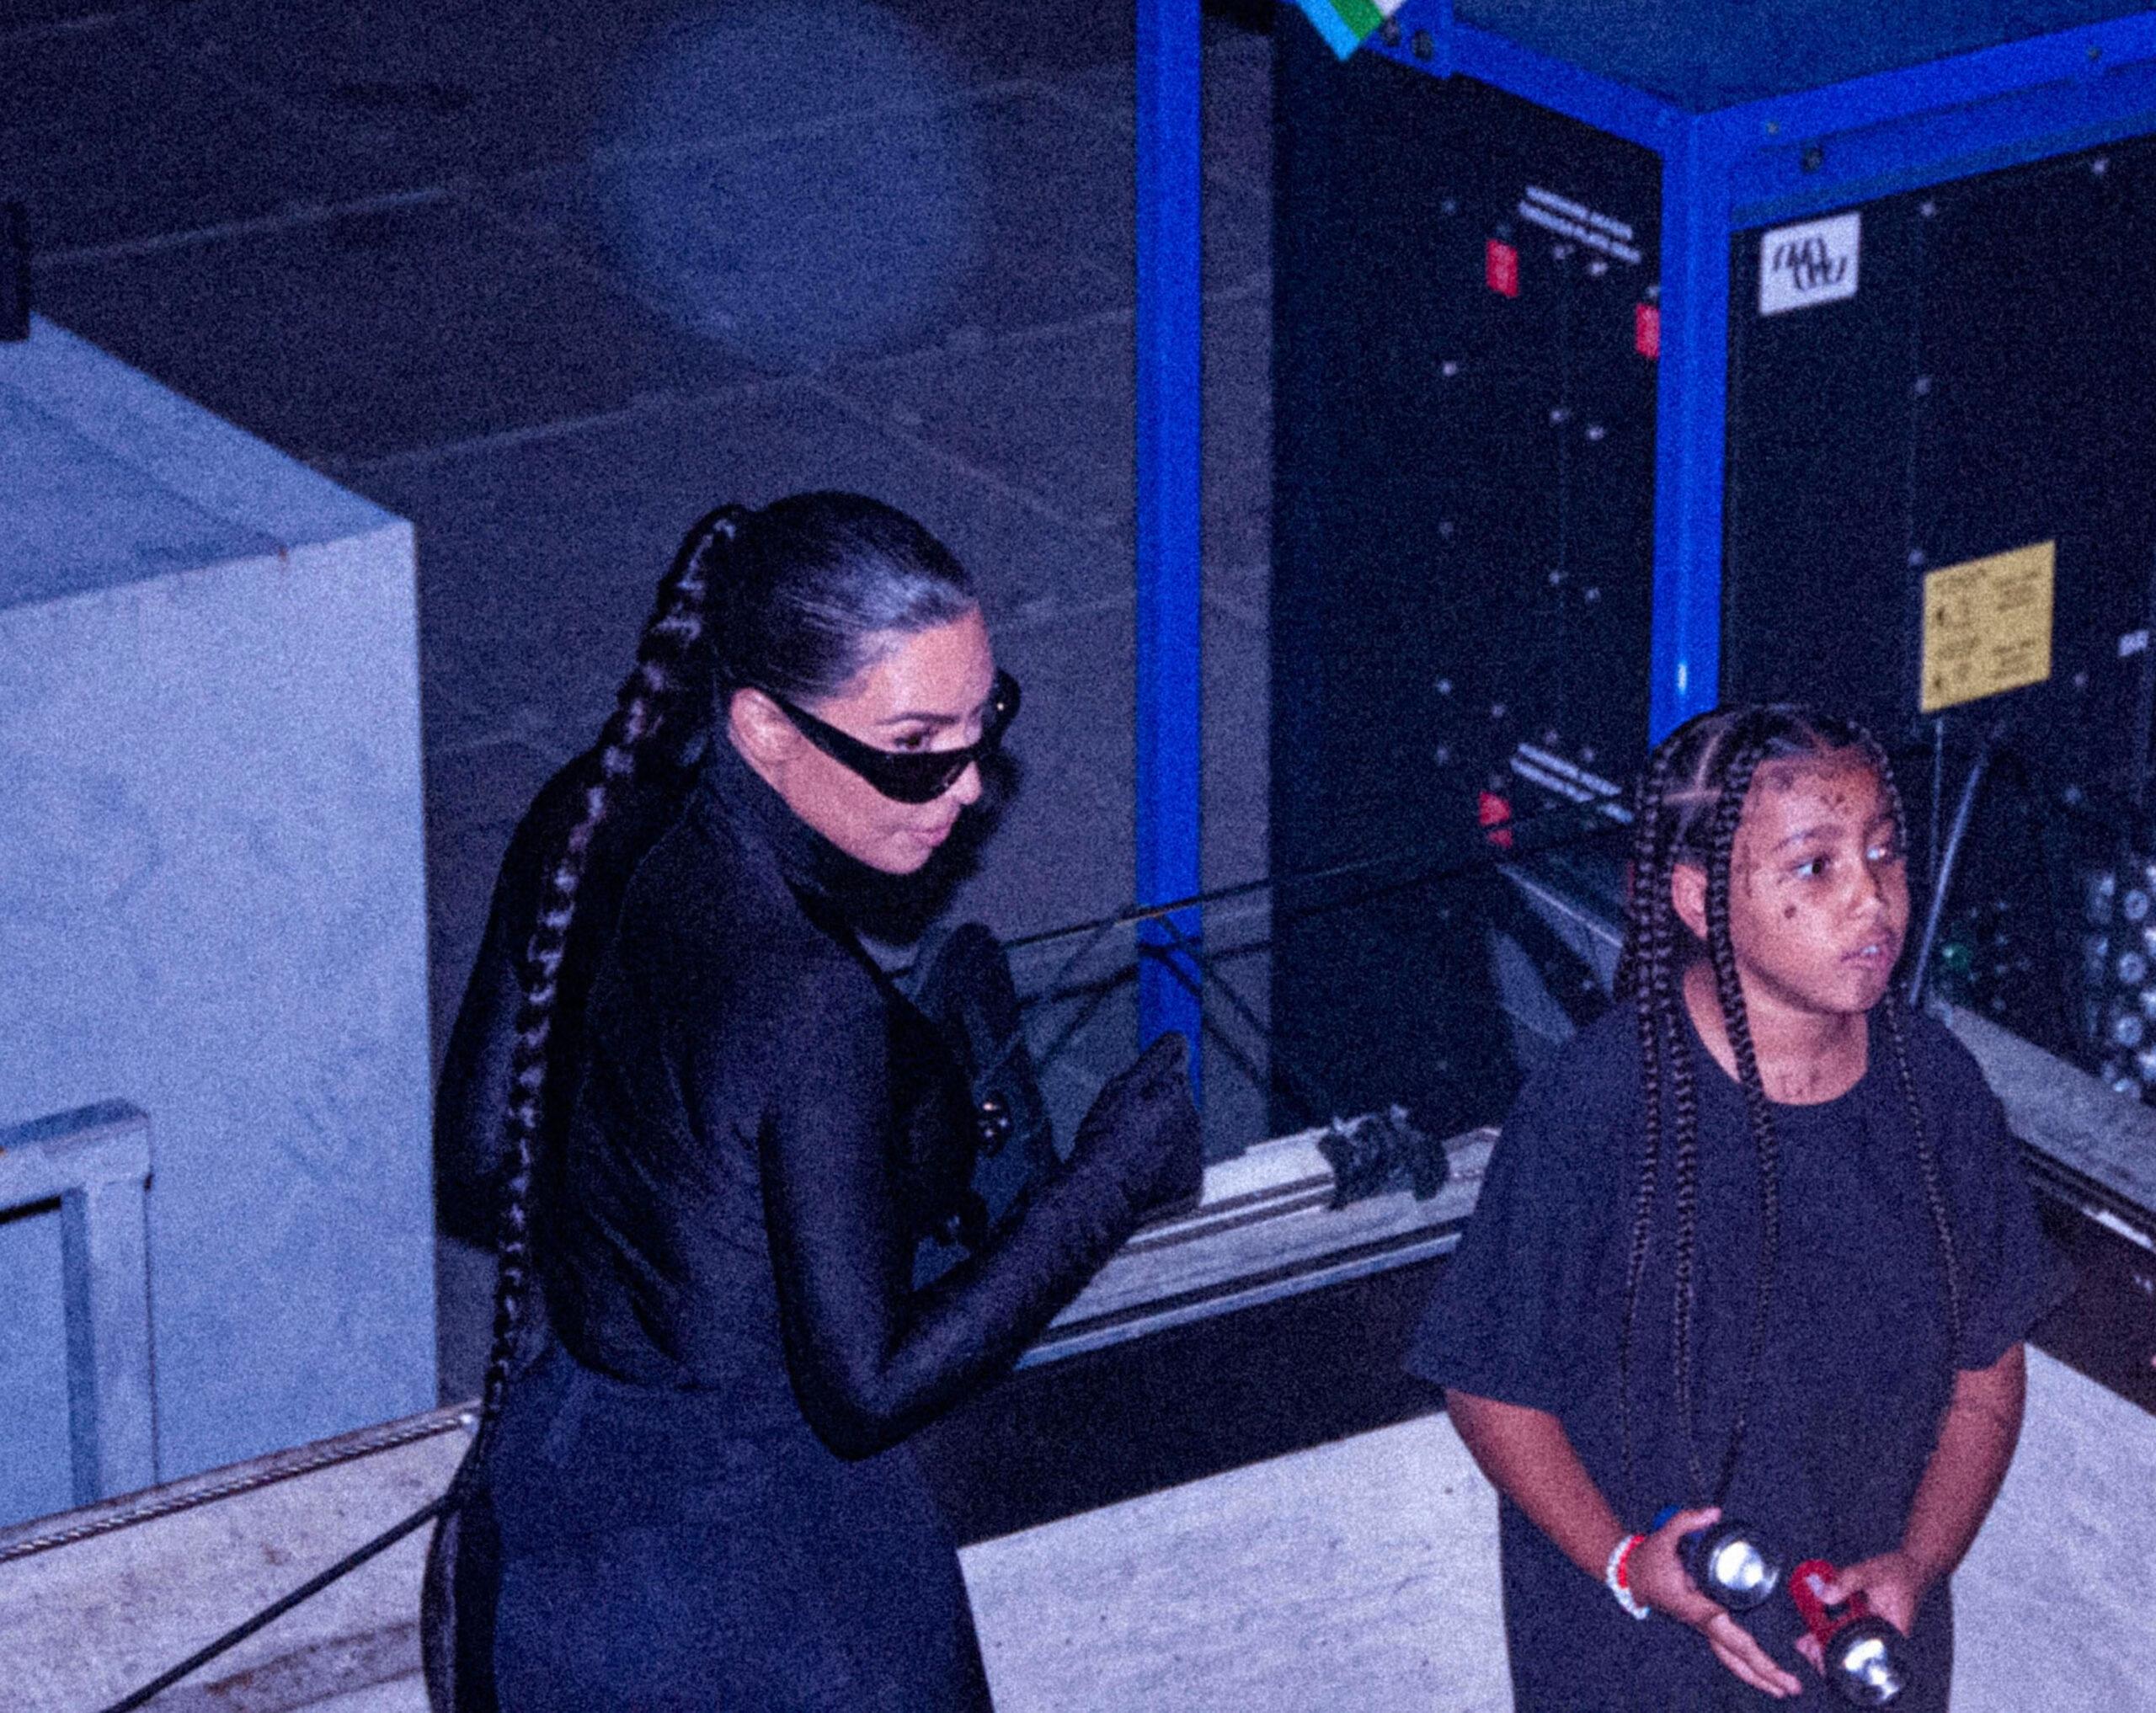 Kim Kardashian and her children show their support for Kanye West at his album launch party in Atlanta. The reality superstar stunned in a figure-hugging black Balenciaga outift matching Kanye’s as she watched him host his second release party for “Donda” at the Mercedes-Benz Stadium on August 5. Kim was briefly spotted without her designer sunglasses, while daughter North West had what appeared to be tattoo-style transfers on her face as she cheered on her dad with siblings Saint, Chicago and Psalm. 05 Aug 2021 Pictured: Kim Kardashian and North West at Kanye West's second "Donda" album release party at Mercedes-Benz Stadium in Atlanta. Photo credit: Sam Johnston/MEGA TheMegaAgency.com +1 888 505 6342 (Mega Agency TagID: MEGA776977_001.jpg) [Photo via Mega Agency]